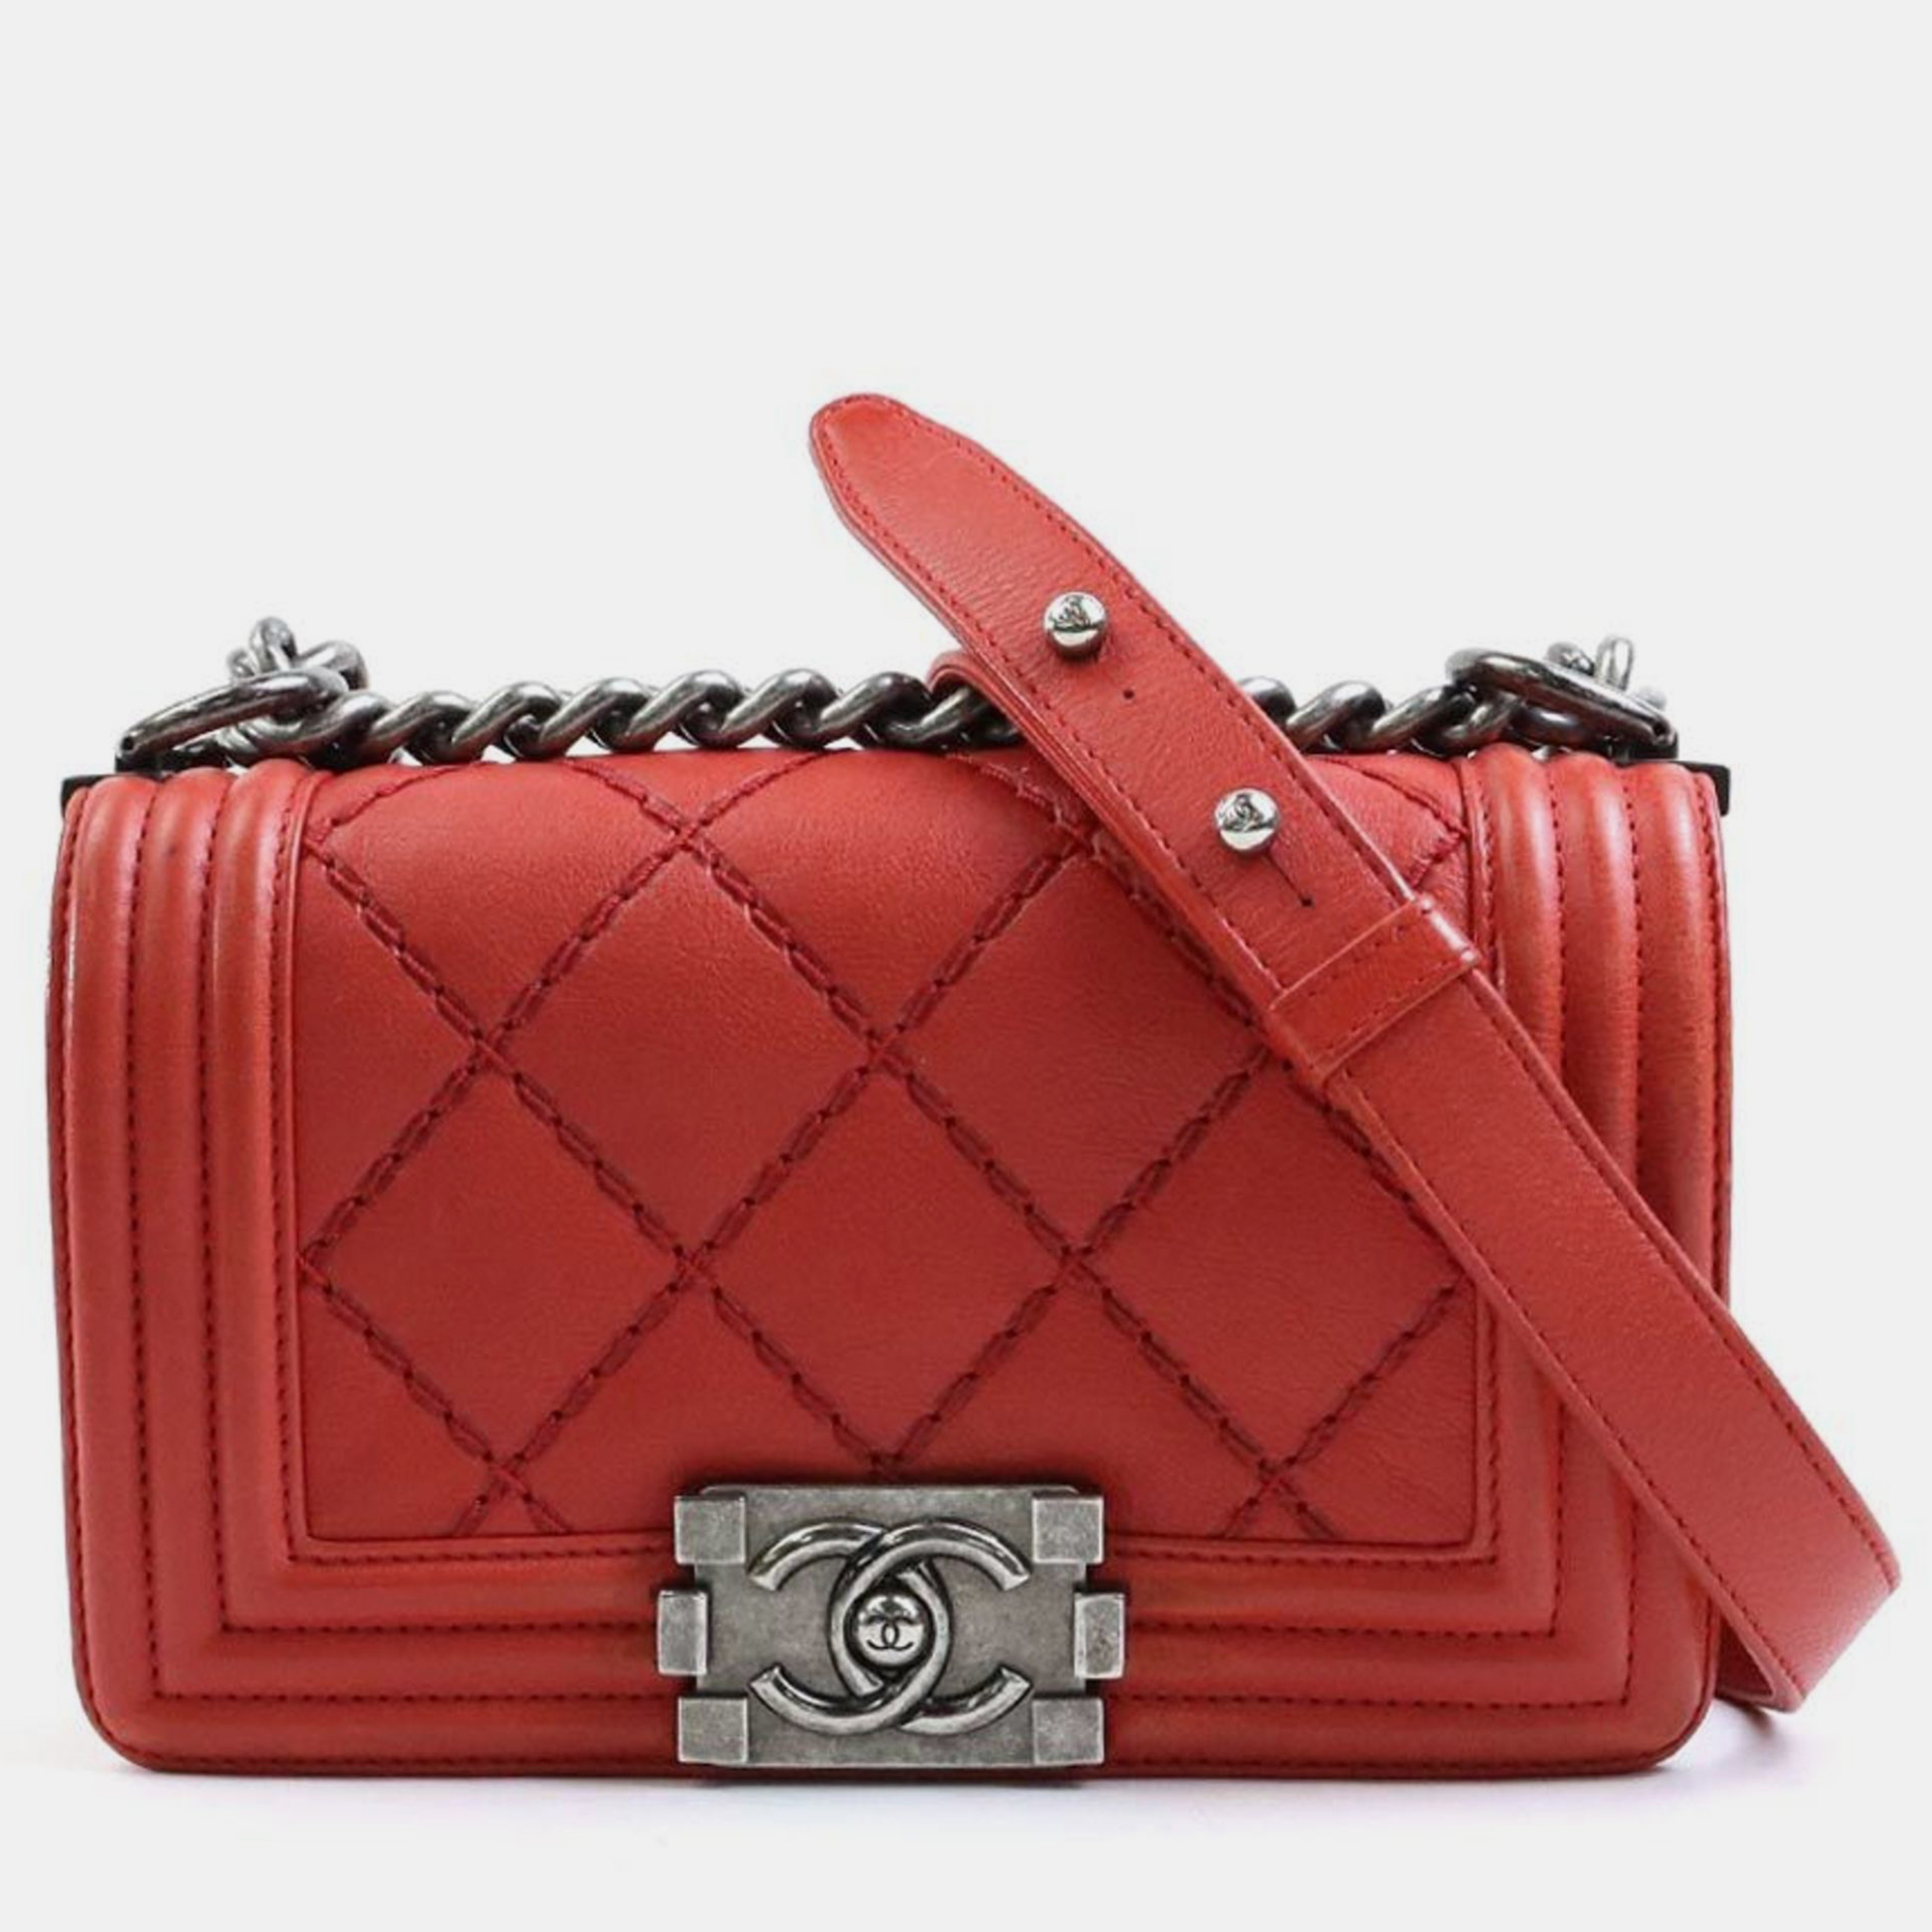 Pre-owned Chanel Red Leather Mini Boy Bag